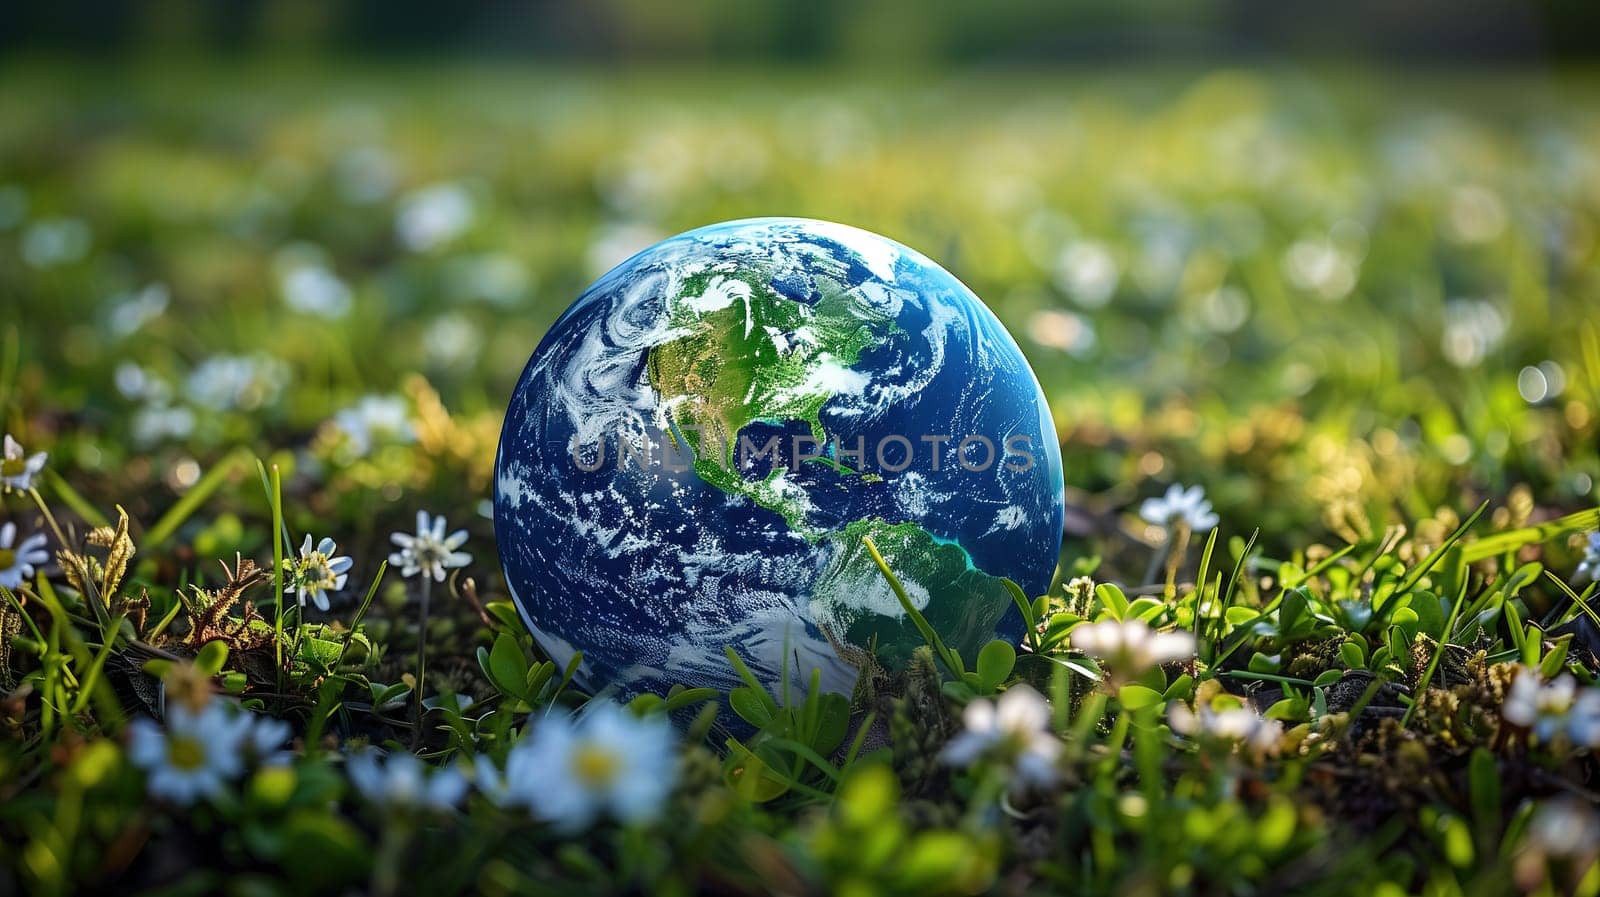 Earth Day Celebration With a Small Globe Resting in a Spring Meadow by TRMK